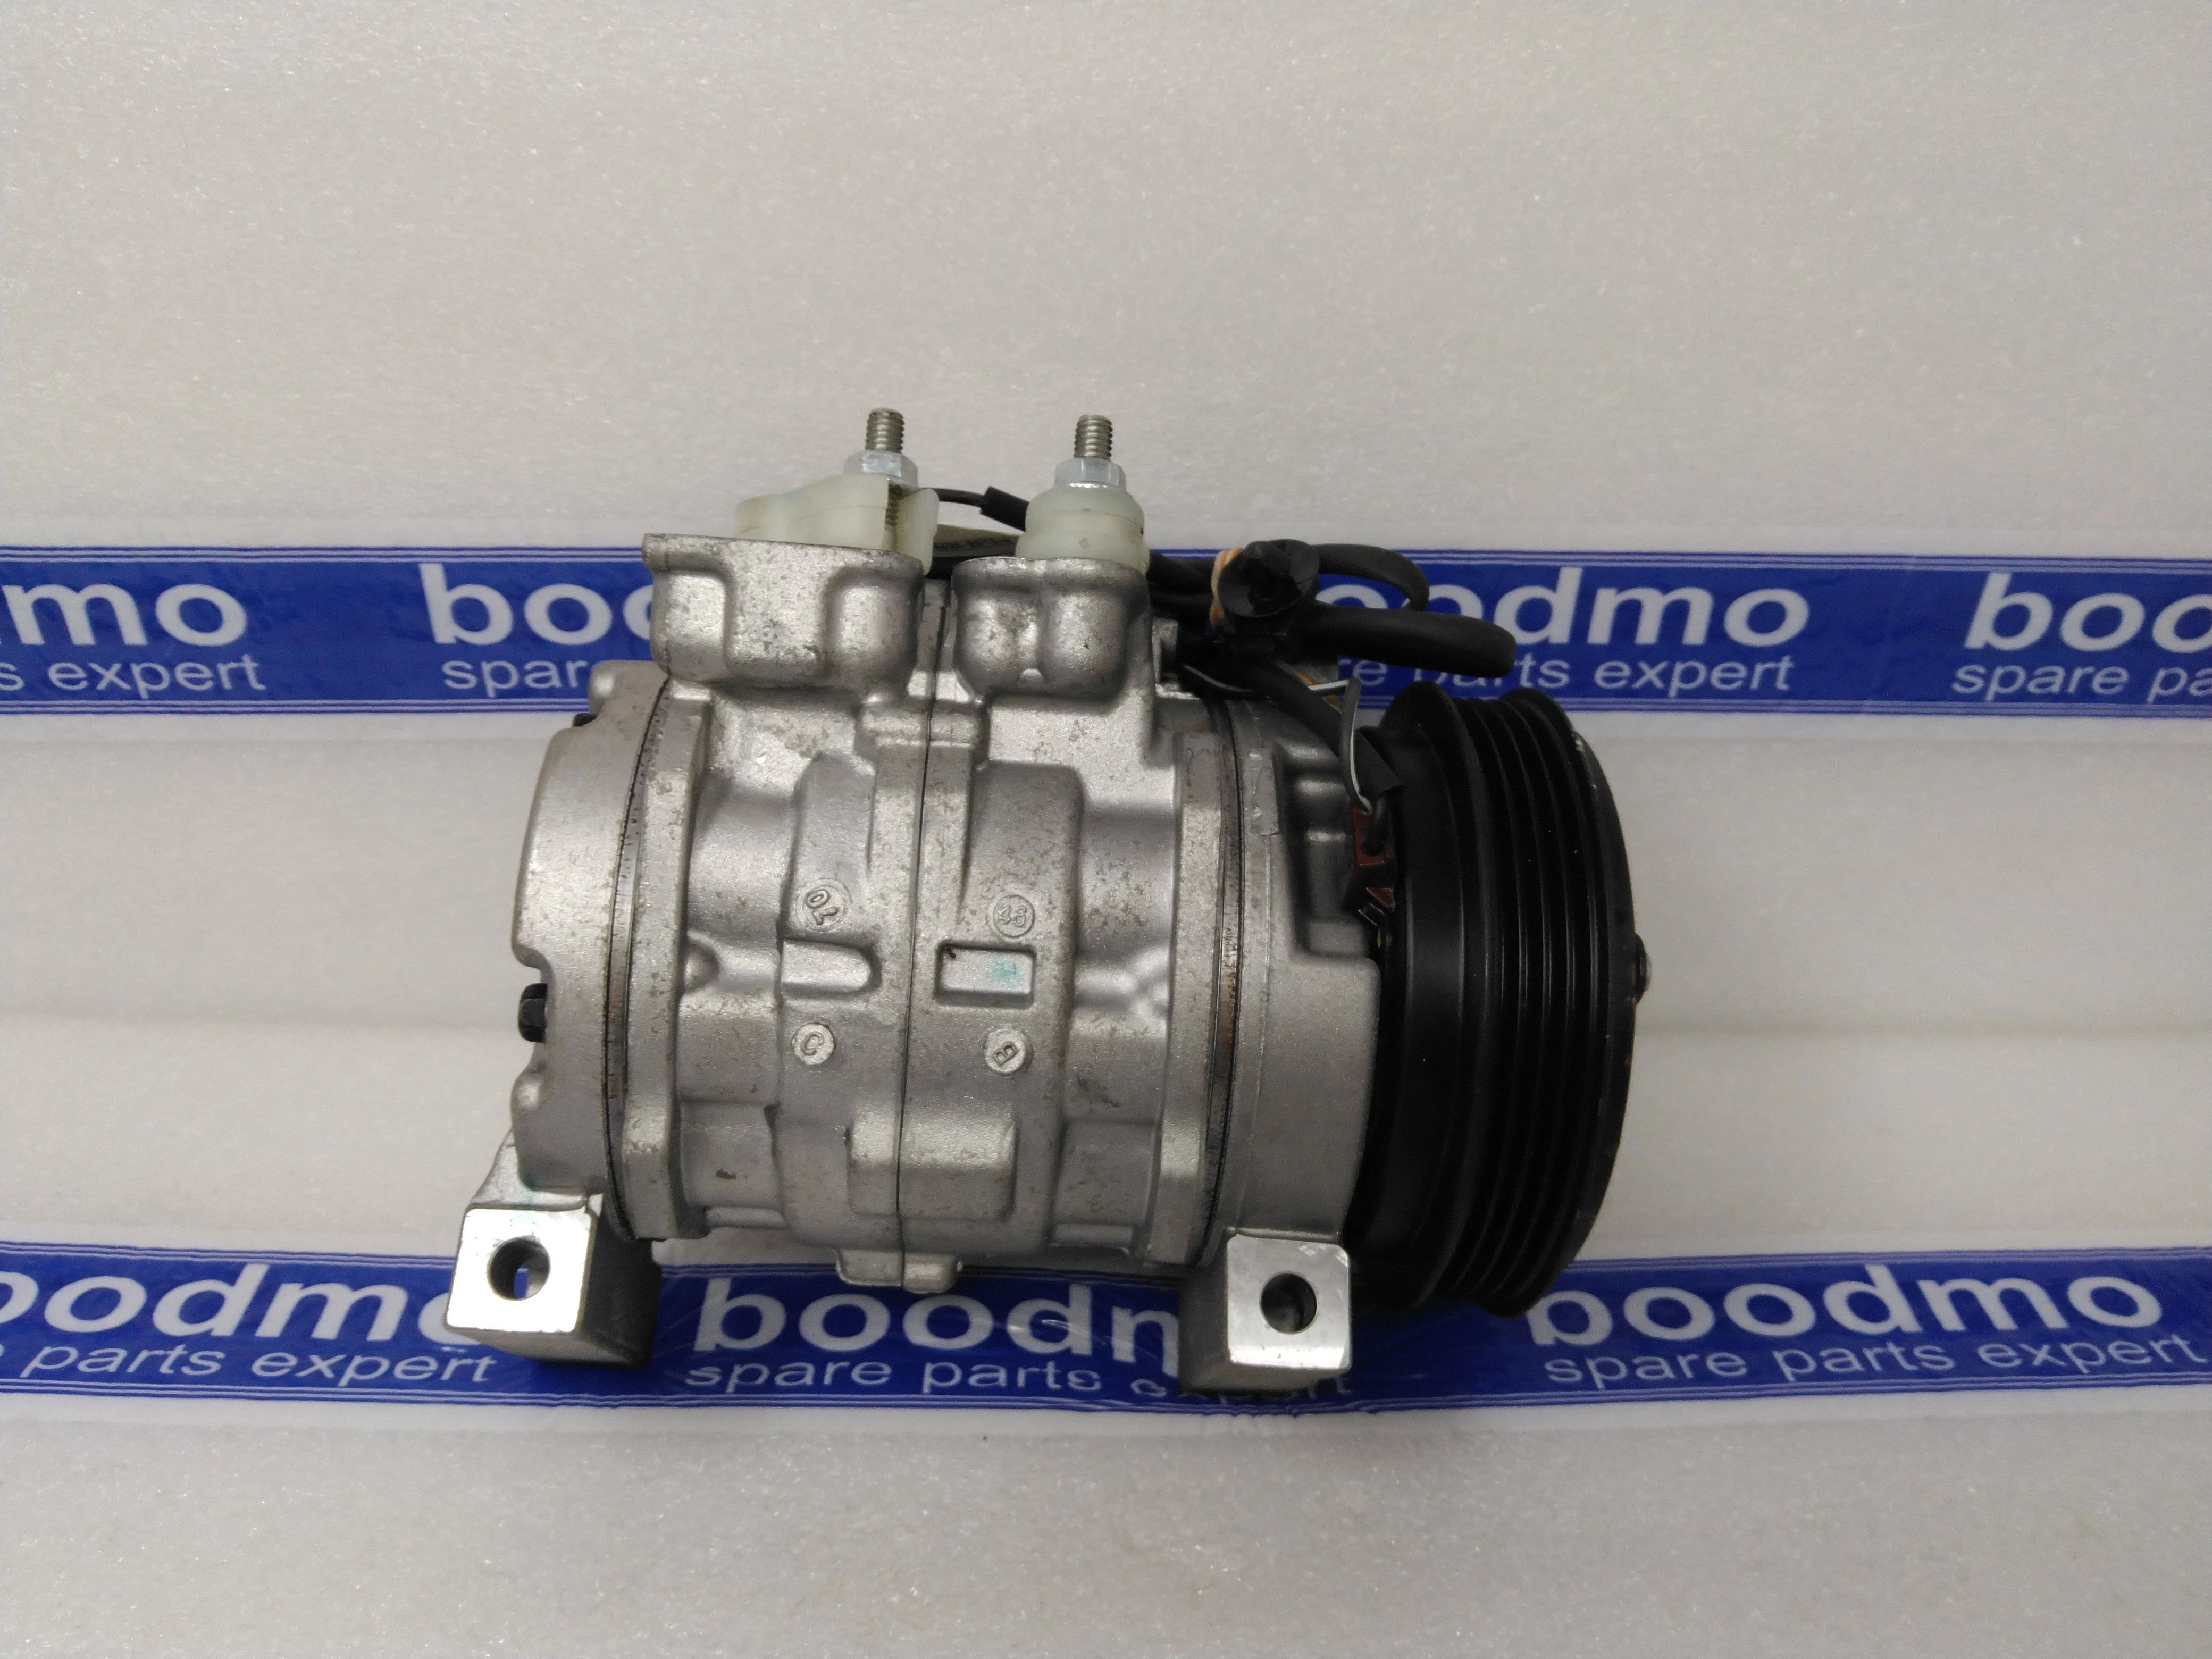 Compressor Assembly: Subros 64710020-0-H -compatibility, features,  prices. boodmo